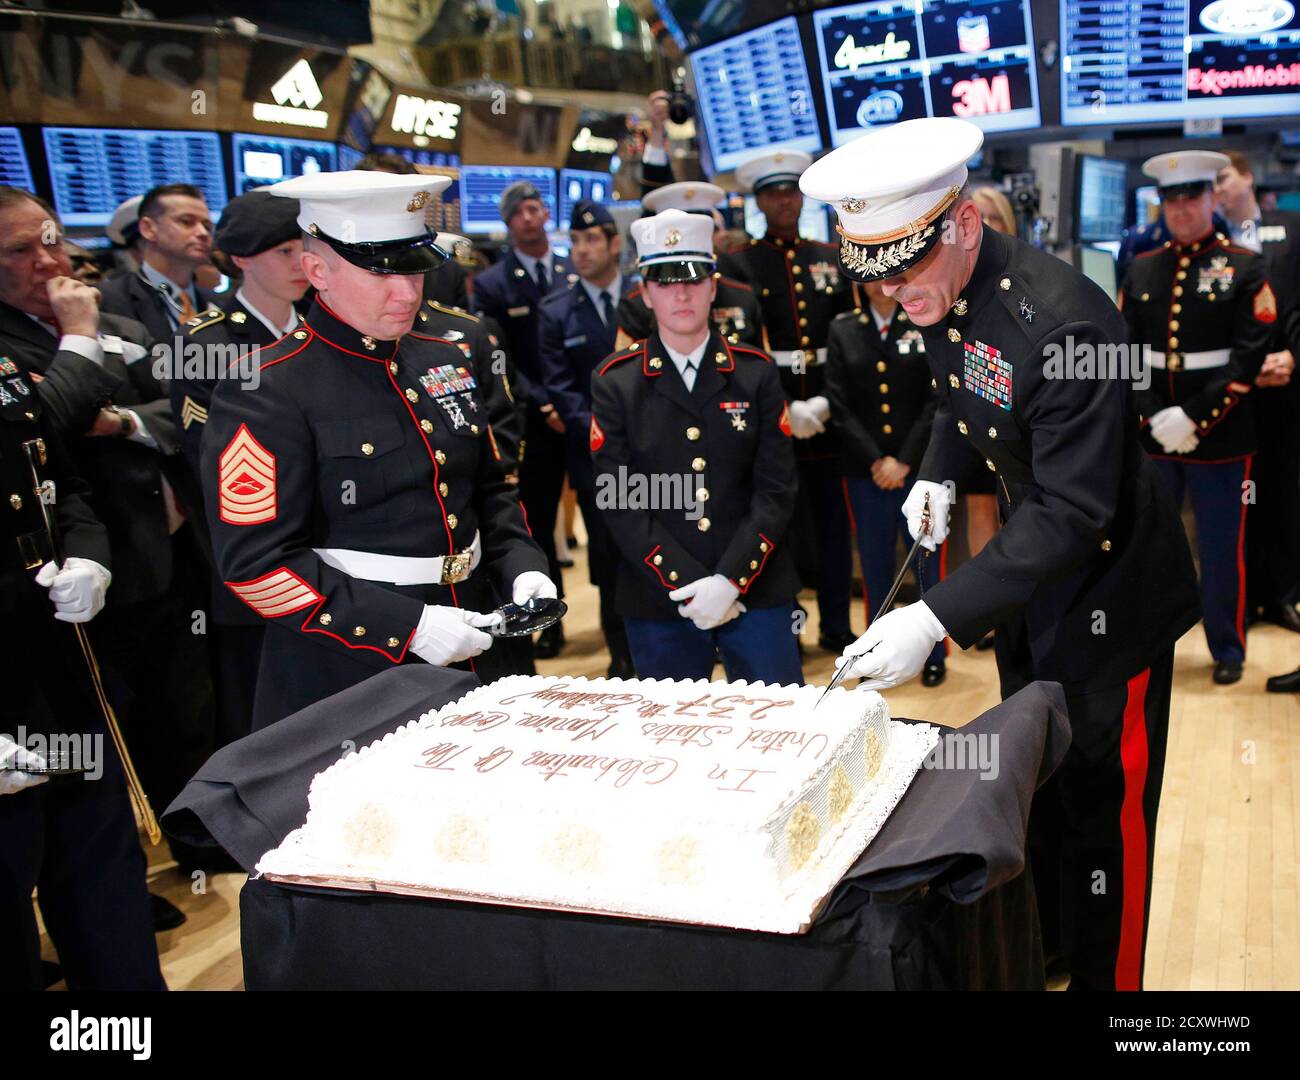 U.S. Marine Corps Major General Michael Dana (R) uses a saber to slice a cake for the USMC's 237th birthday, on the floor of the New York Stock Exchange November 12, 2012.   REUTERS/Chip East (UNITED STATES - Tags: BUSINESS MILITARY ANNIVERSARY) Stock Photo